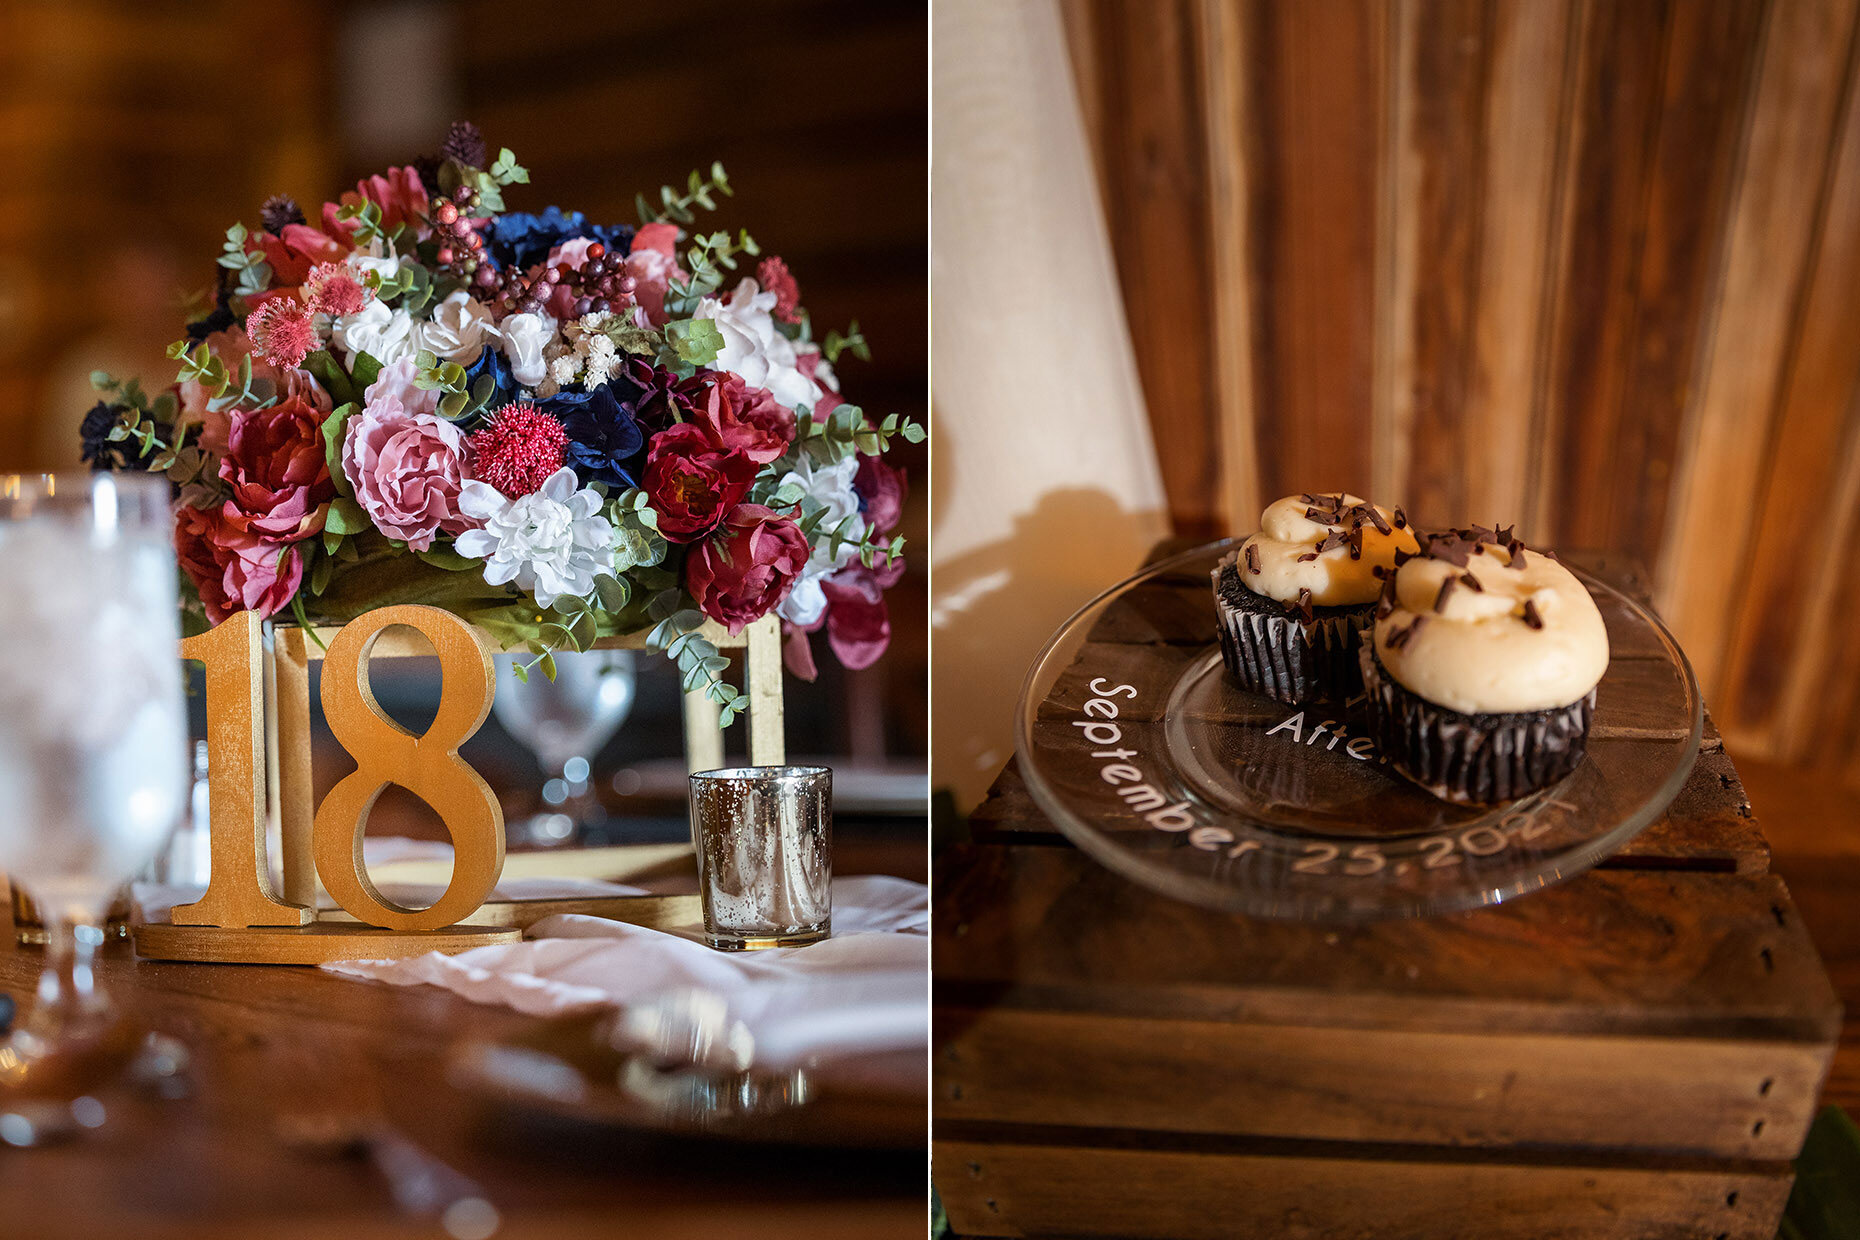 Cupcakes and centerpieces at barn wedding